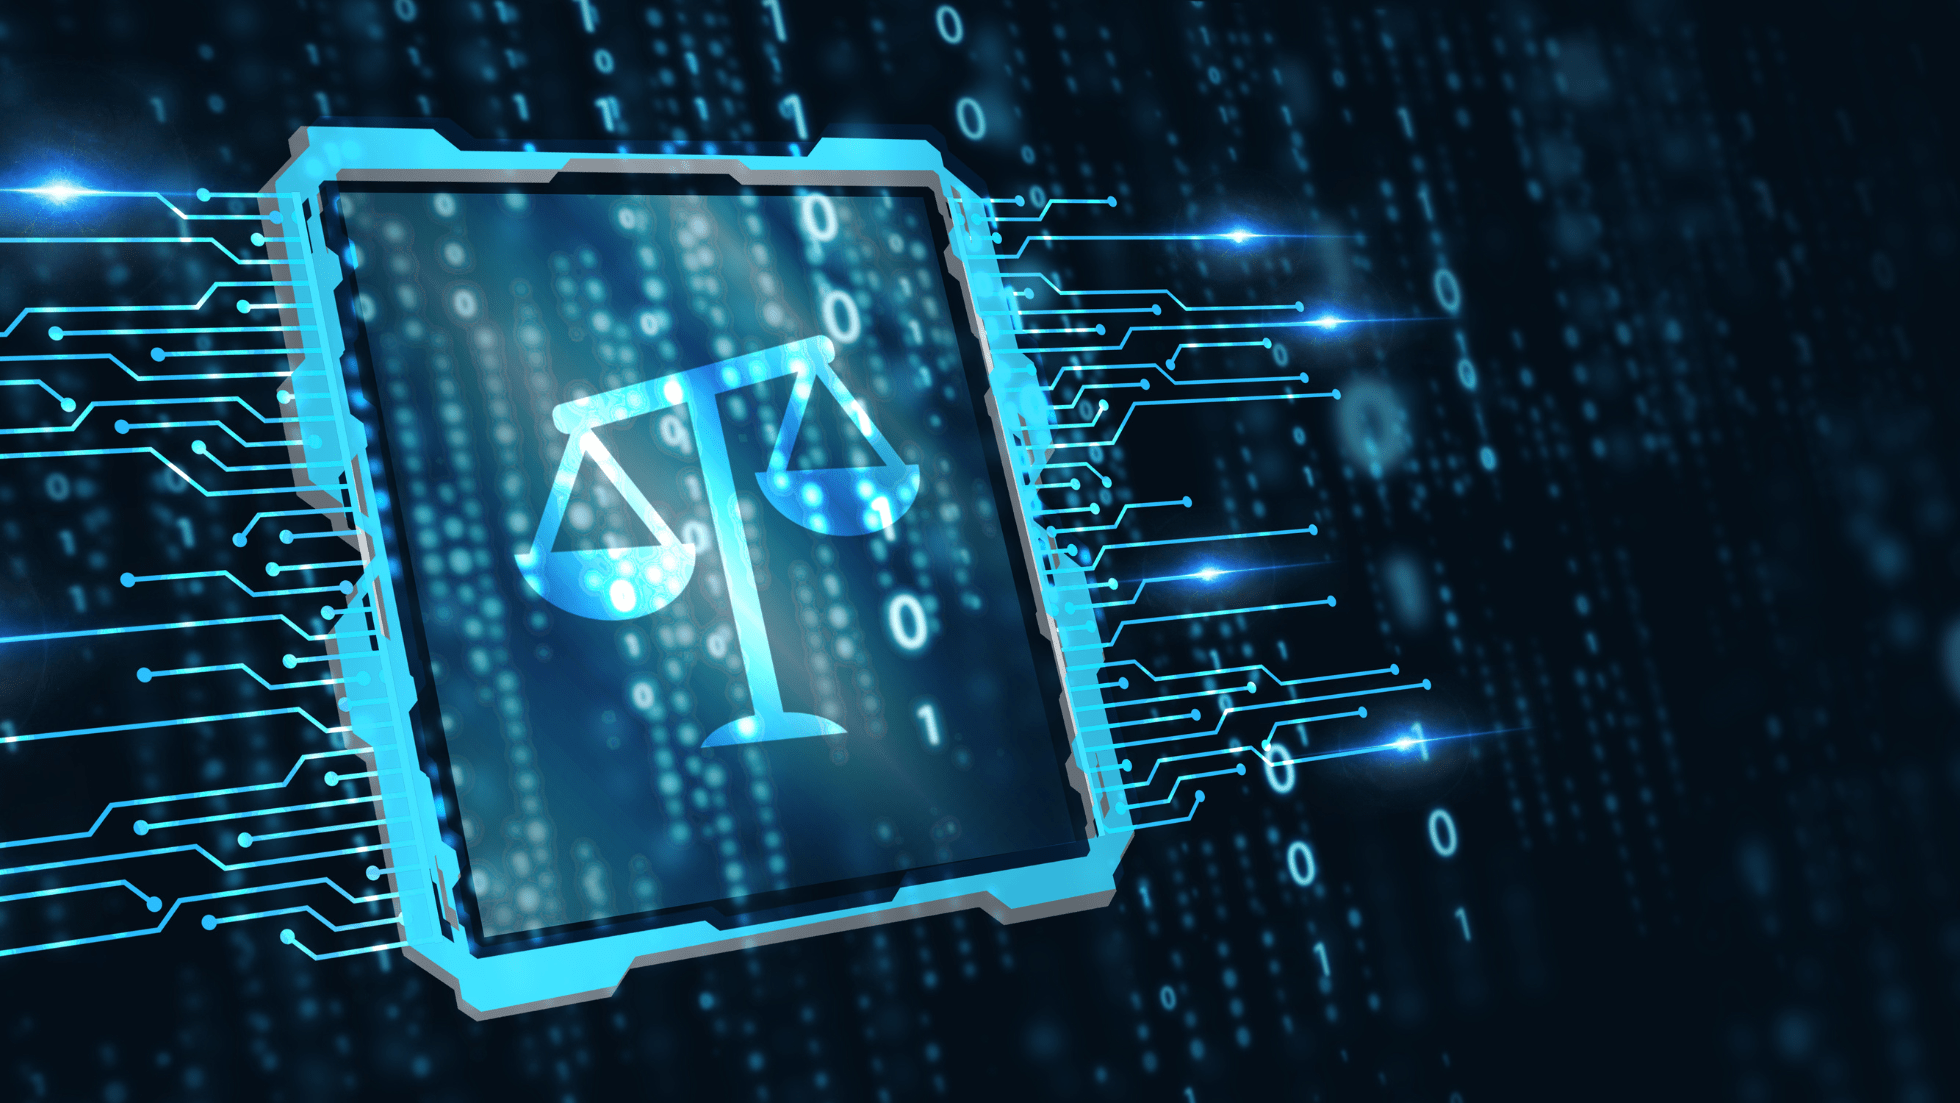 Automating Legal Services to Simply Law Firm Practices